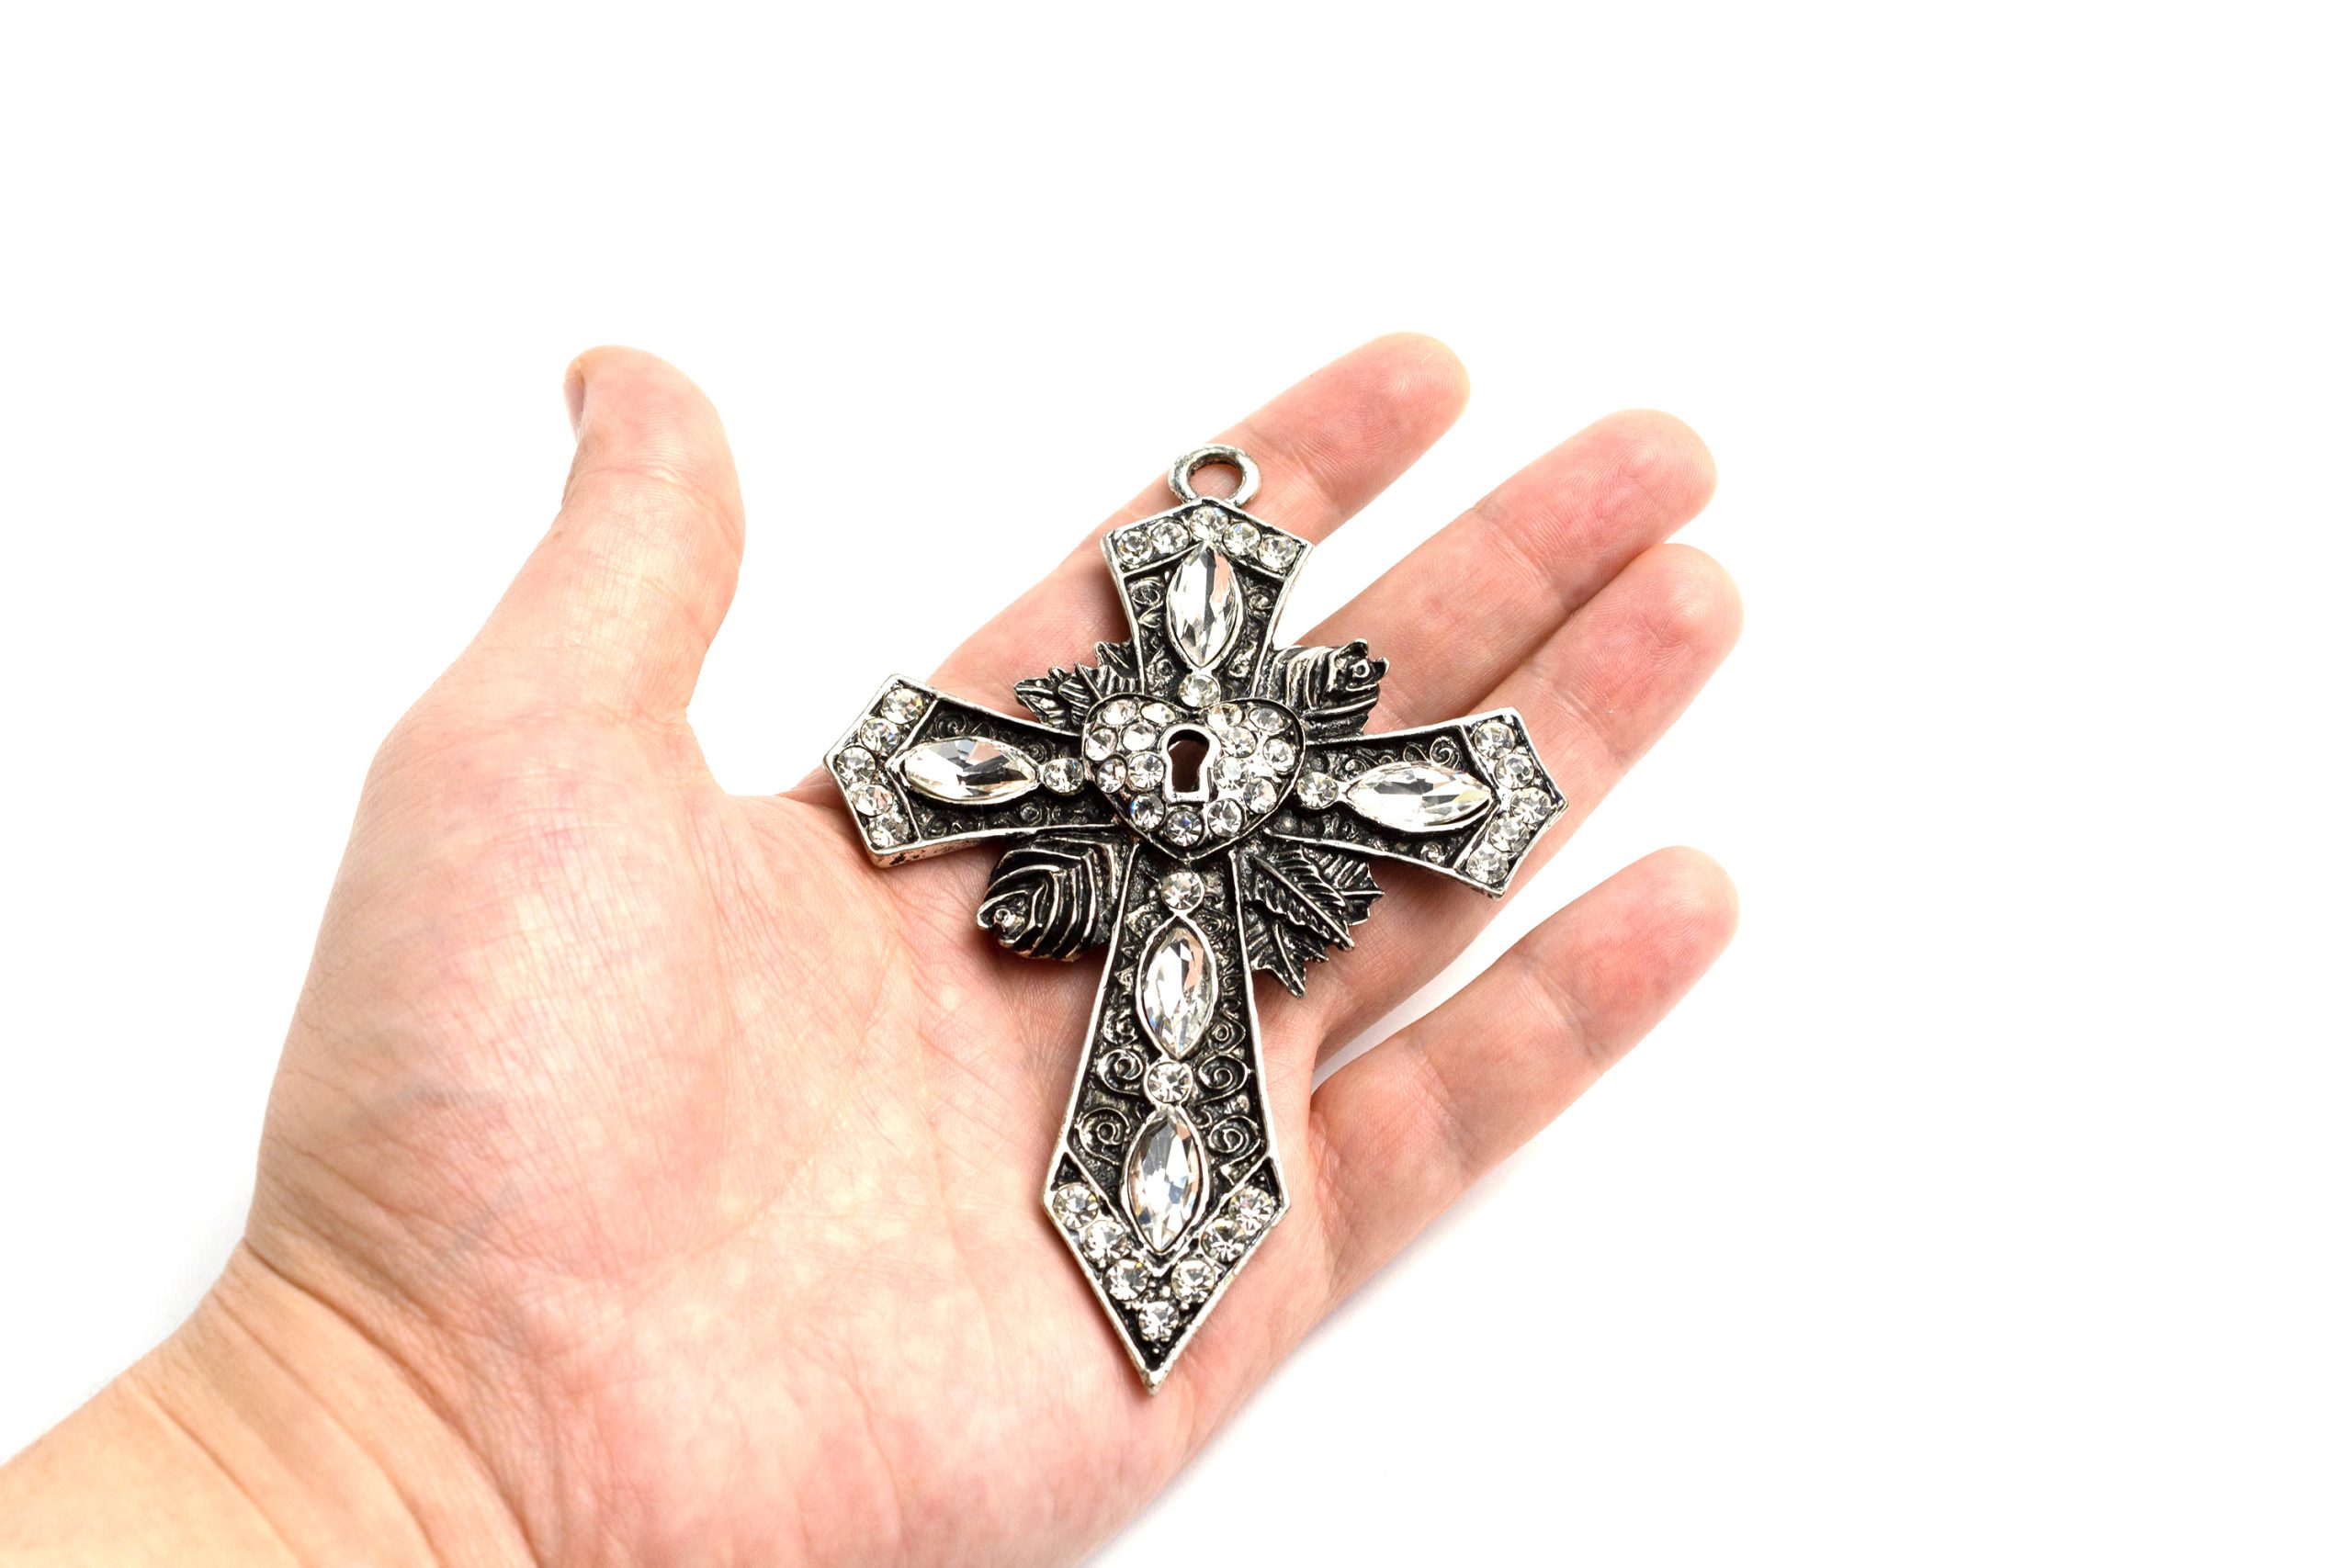 Big cross with rhinestones in hand on a white background isolate